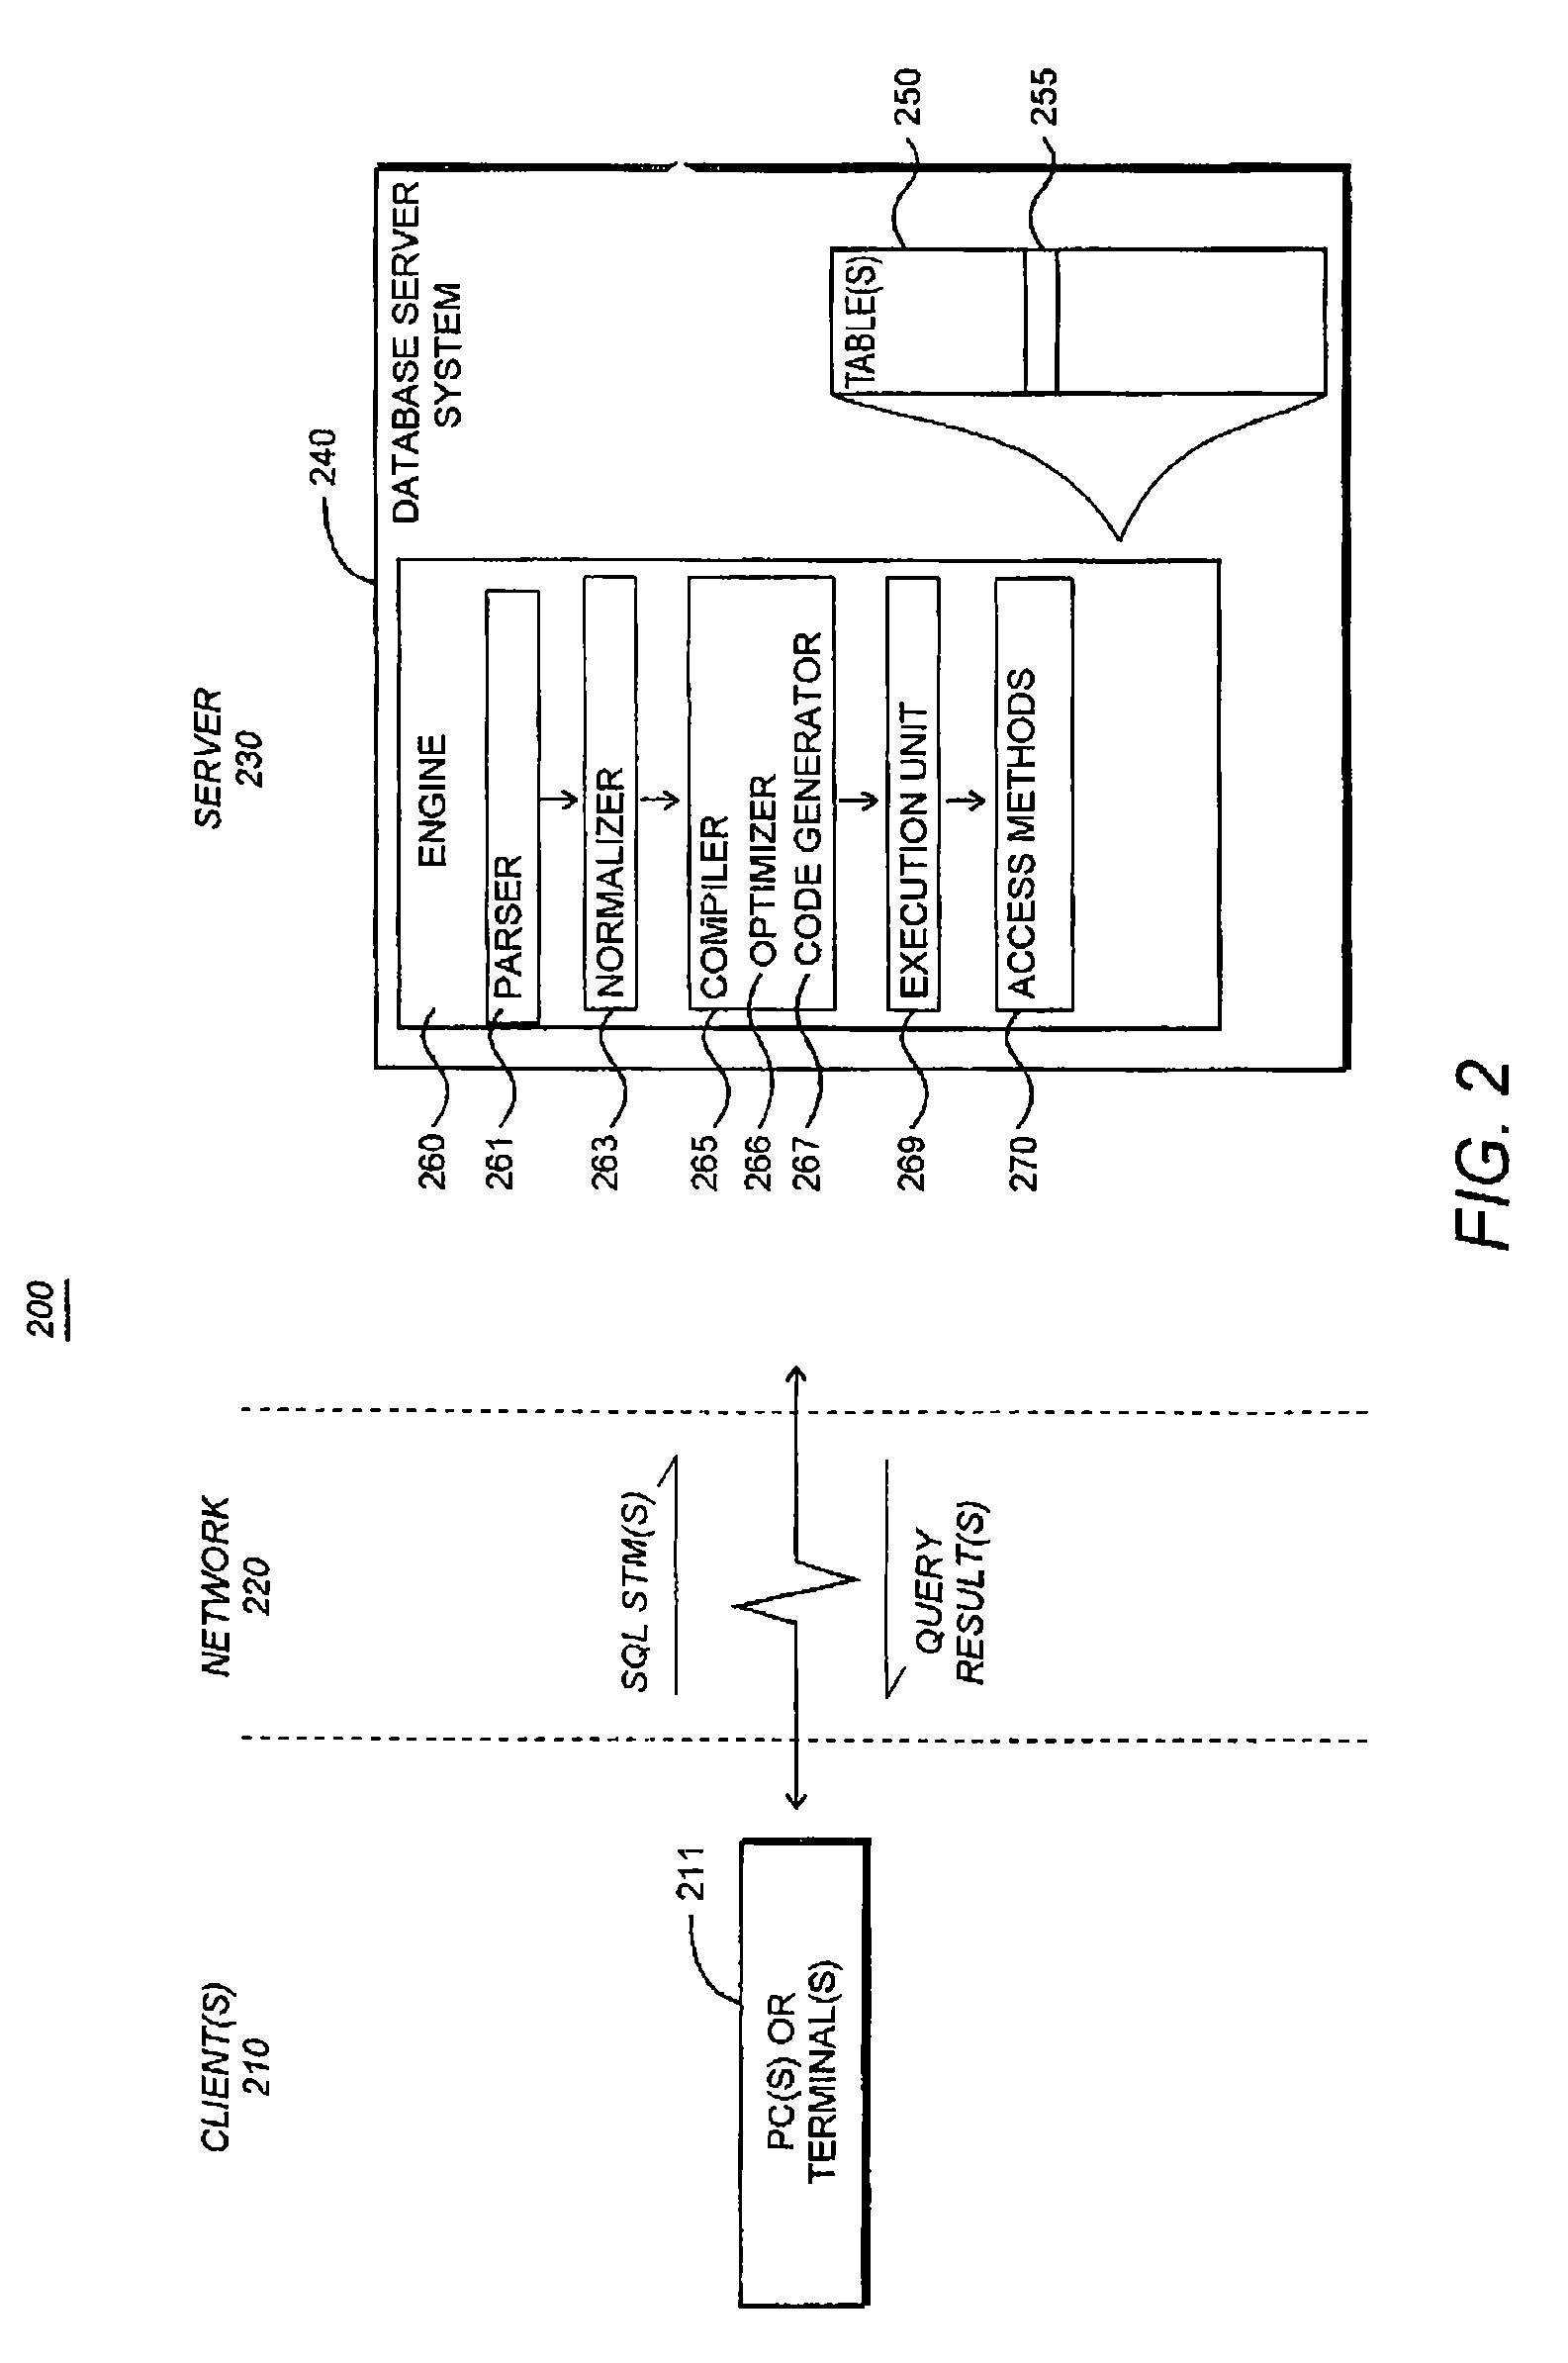 Dynamic Hash Table for Efficient Data Access In A Relational Database System